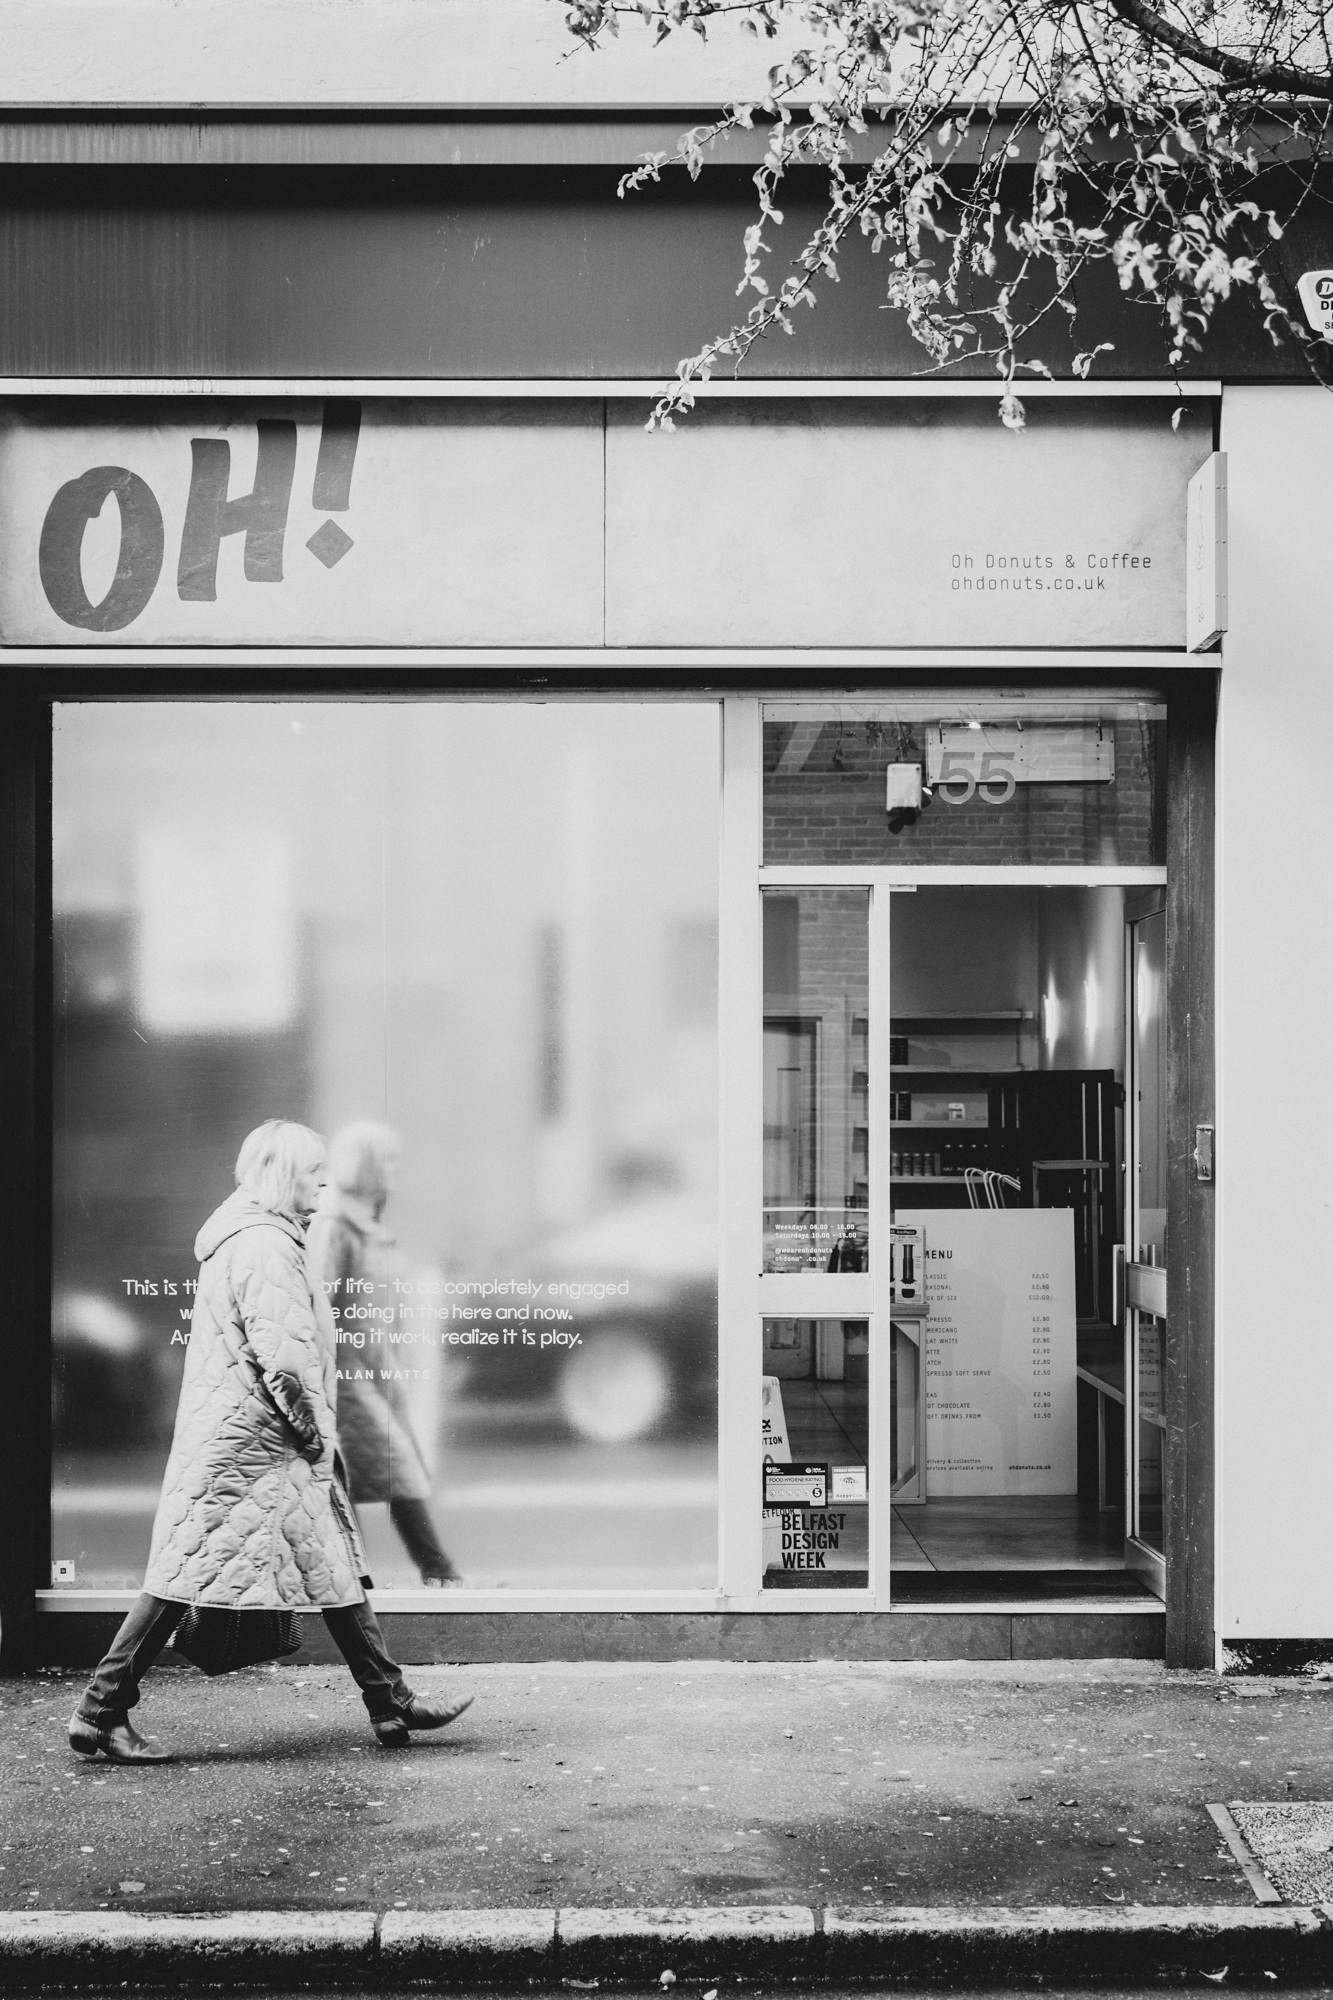 Belfast Design Popup Museum Window Design of Oh! Donuts by Alex Synge First47 photo by Joe Laverty Photography